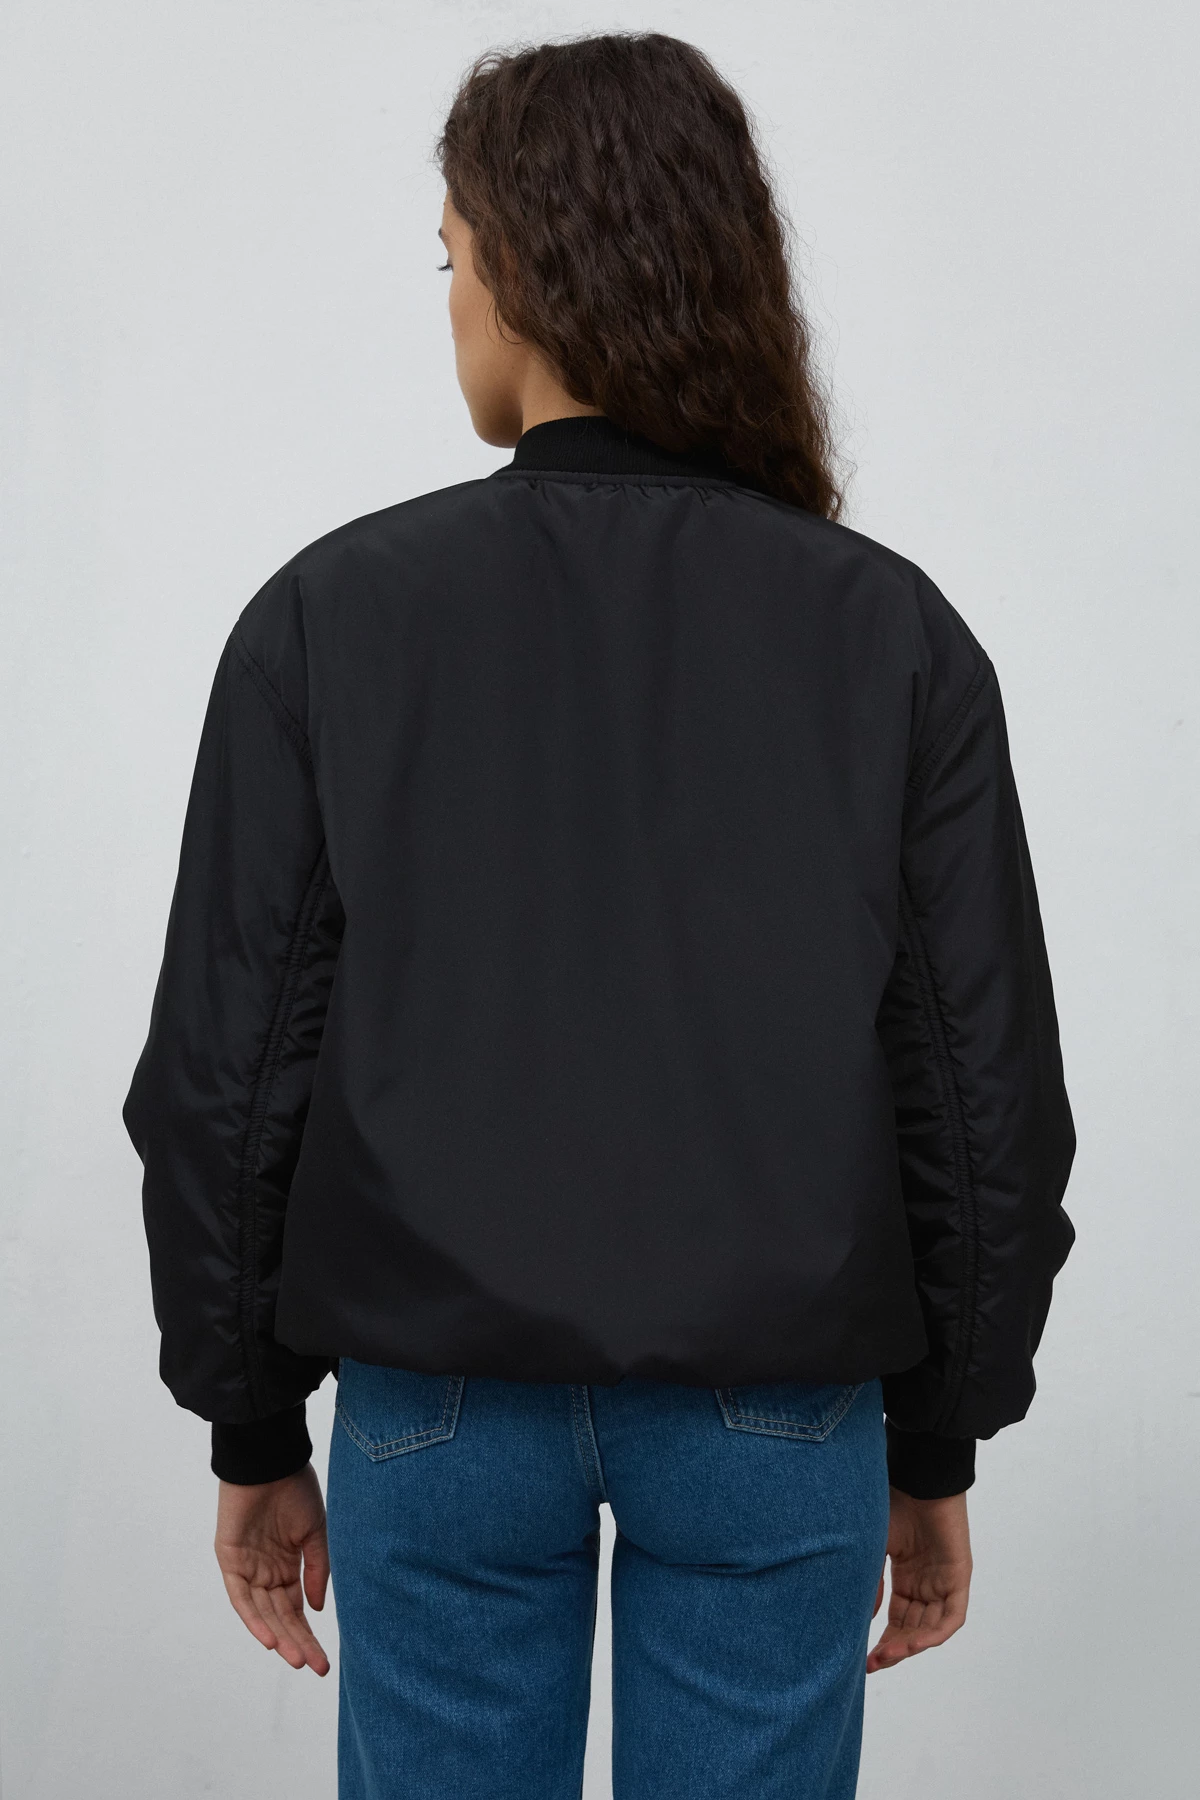 Black bomber jacket made of water-repellent raincoat fabric, photo 4